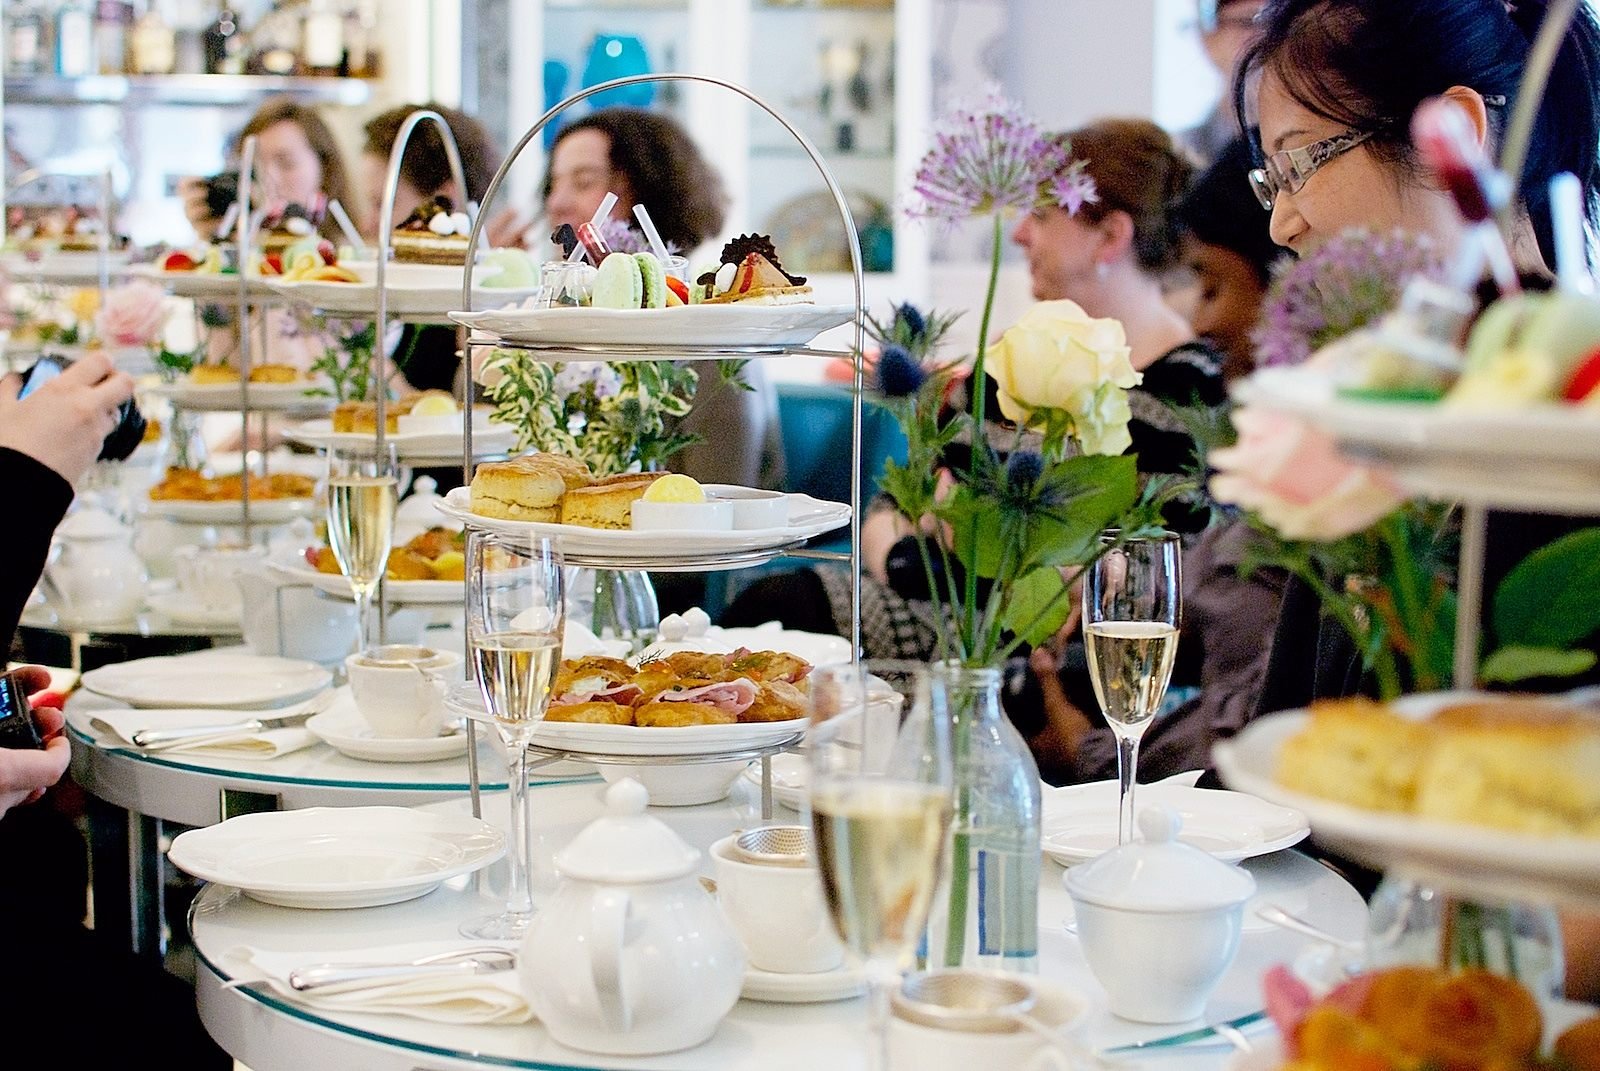 Science Afternoon Tea at The Ampersand Hotel in London | Urban Pixxels